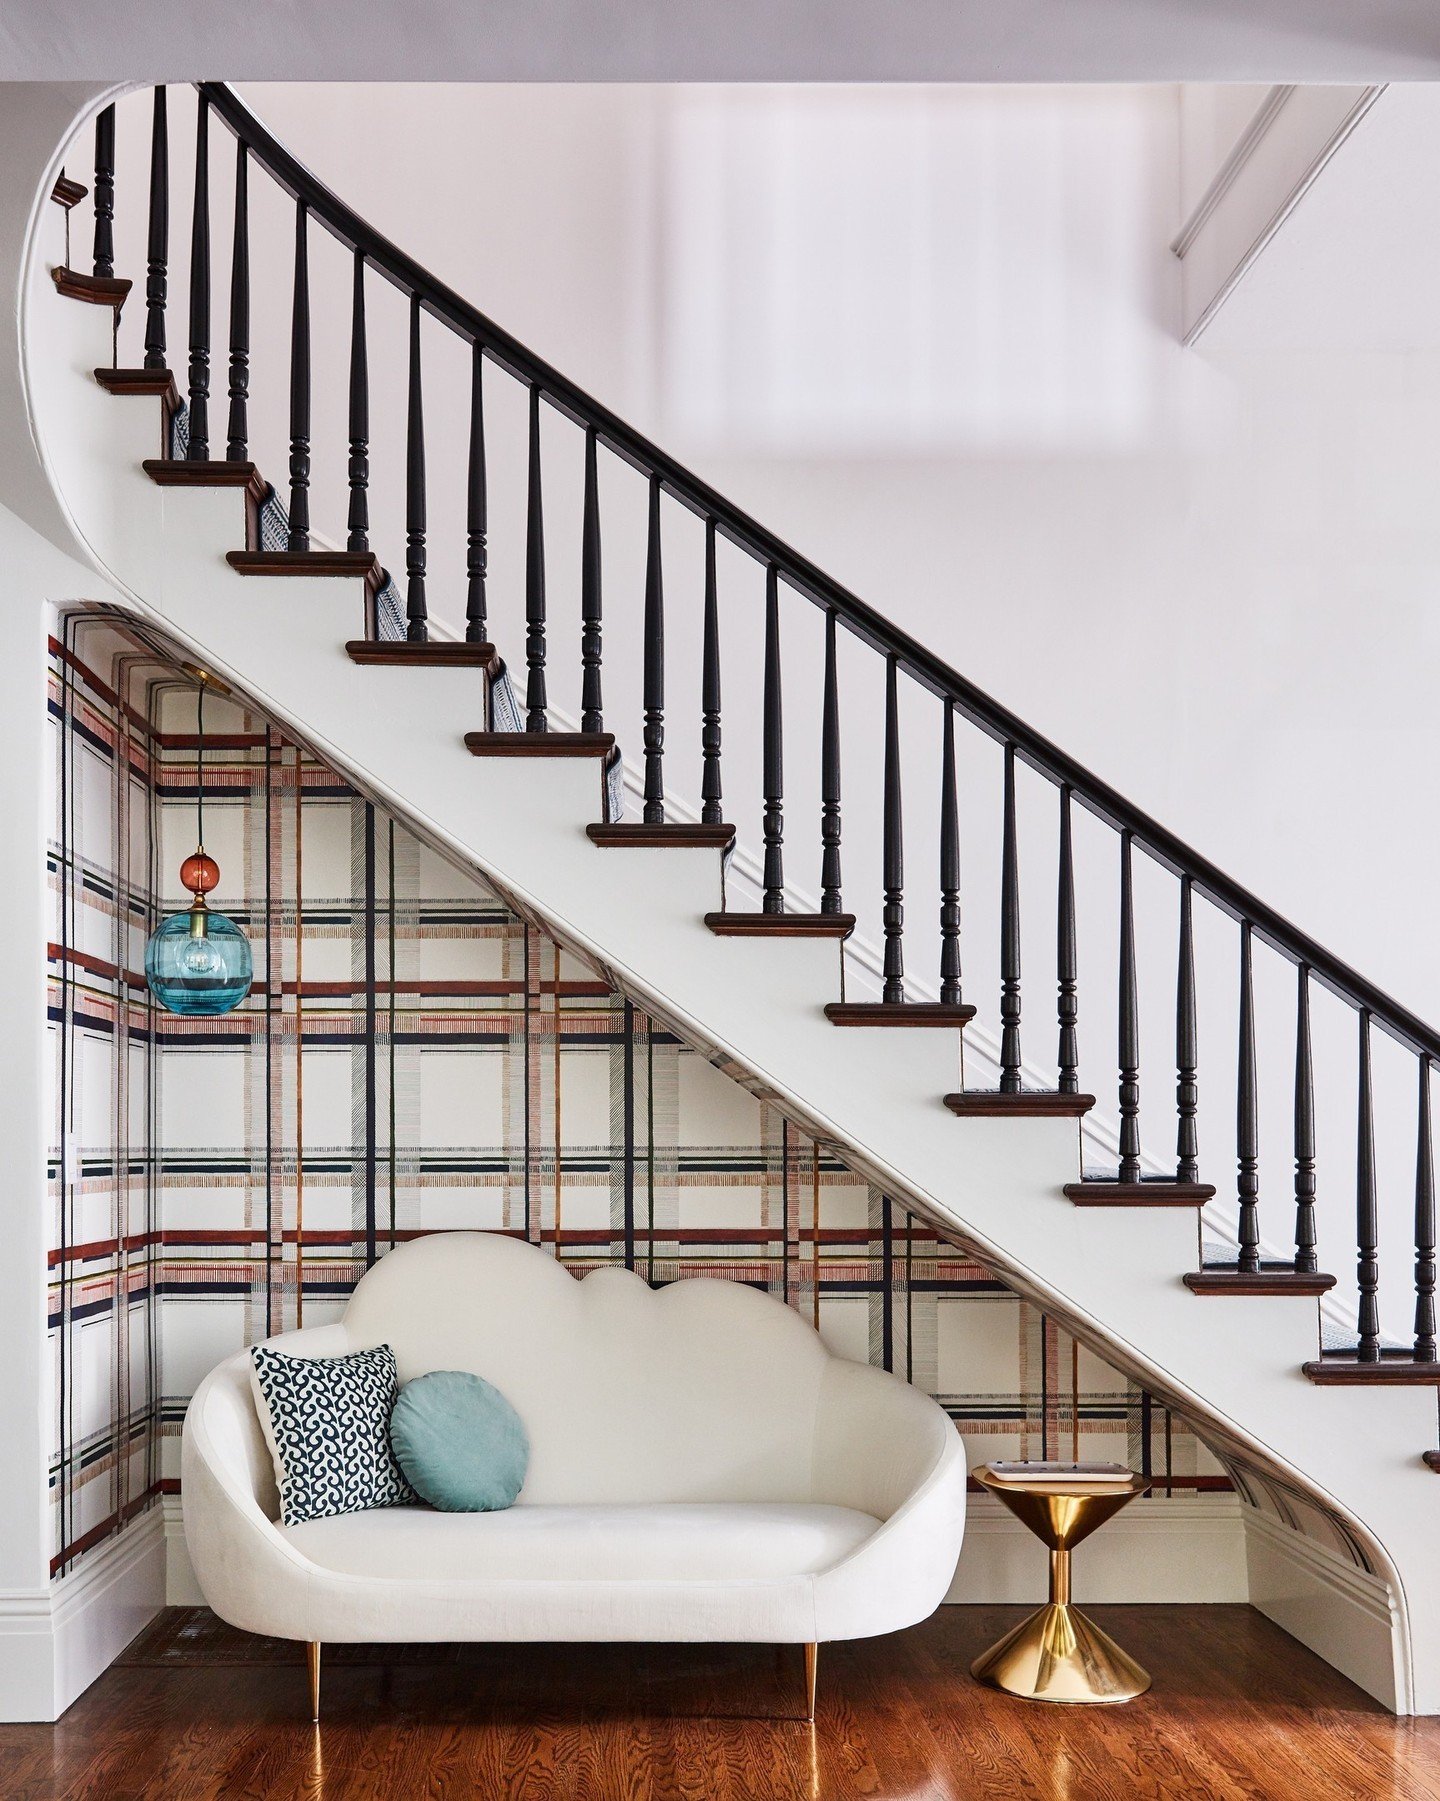 ⁠This gem of an under stair moment is an all time favorite. Swoon. ⁠
⁠
📸: @kuohphotographyinteriors as seen on @housebeautiful ⁠
⁠
#studiomunroe #roomoftheday #interiordesign #sanfrancisco #staircase #wallpaper #hermes